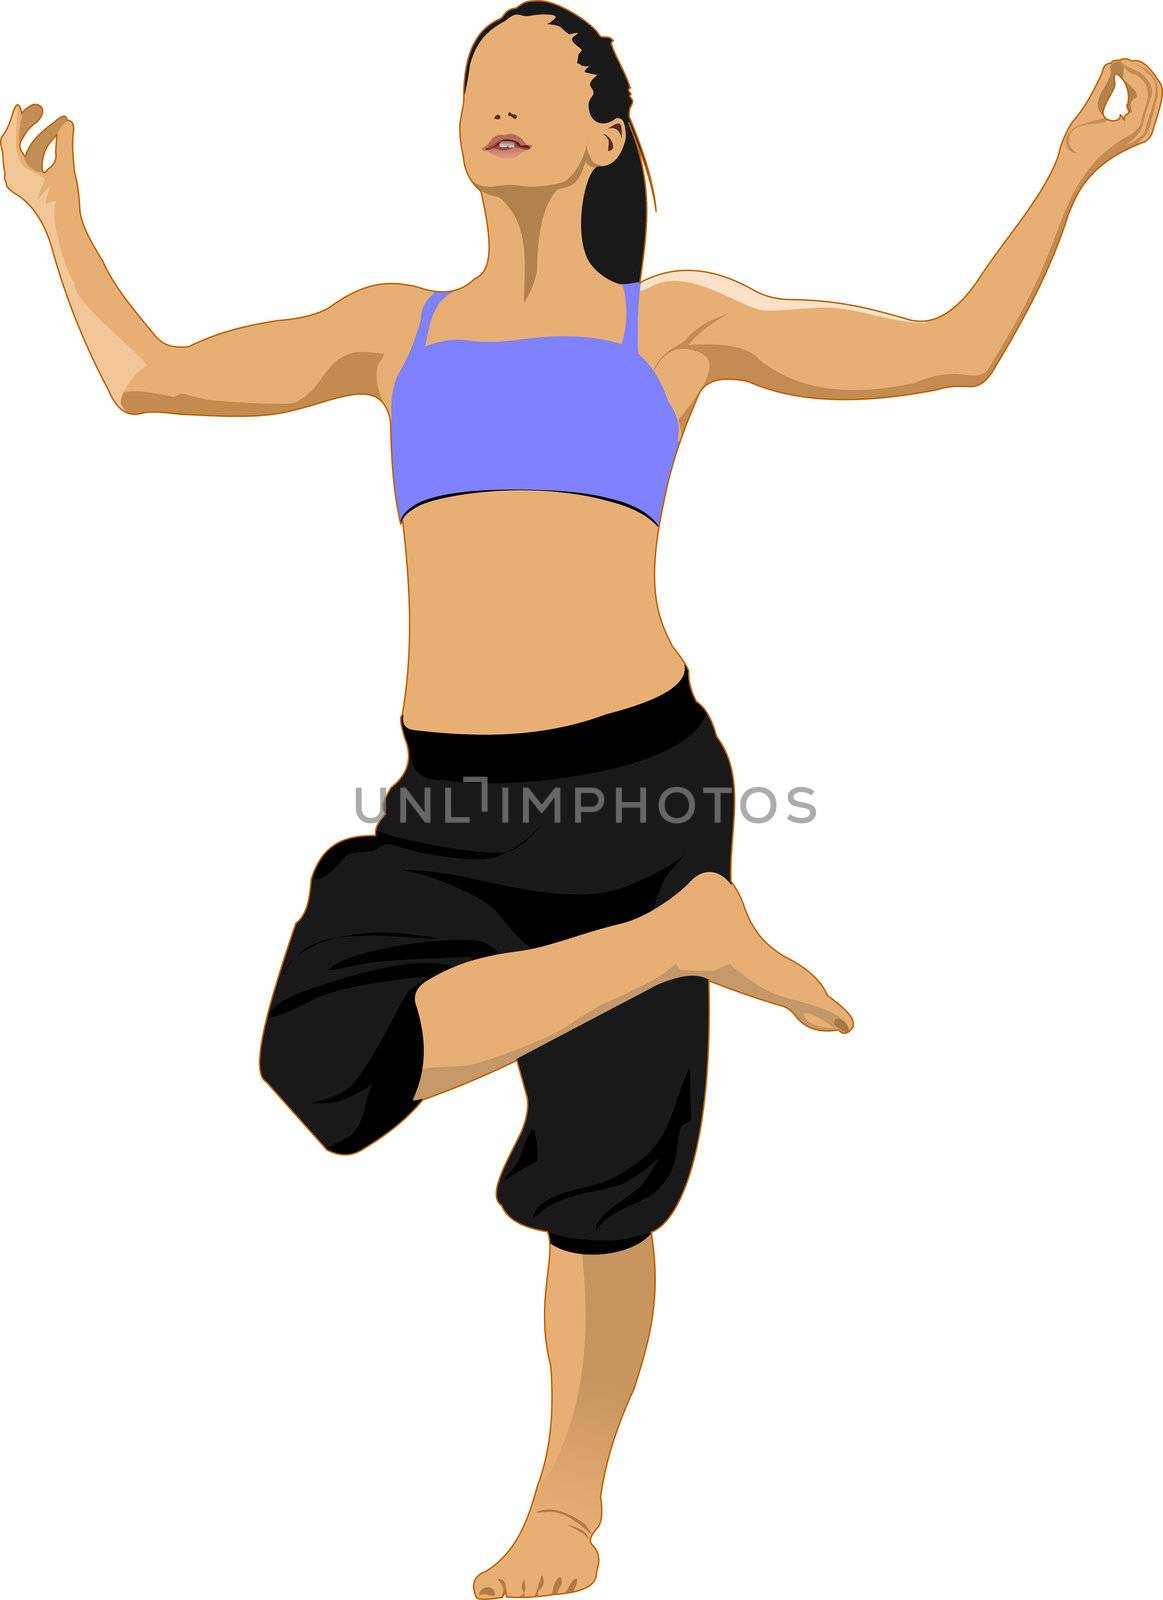 Woman practicing Yoga excercise. Vector Illustration of girl in Dancer's Pose isolated on white background.